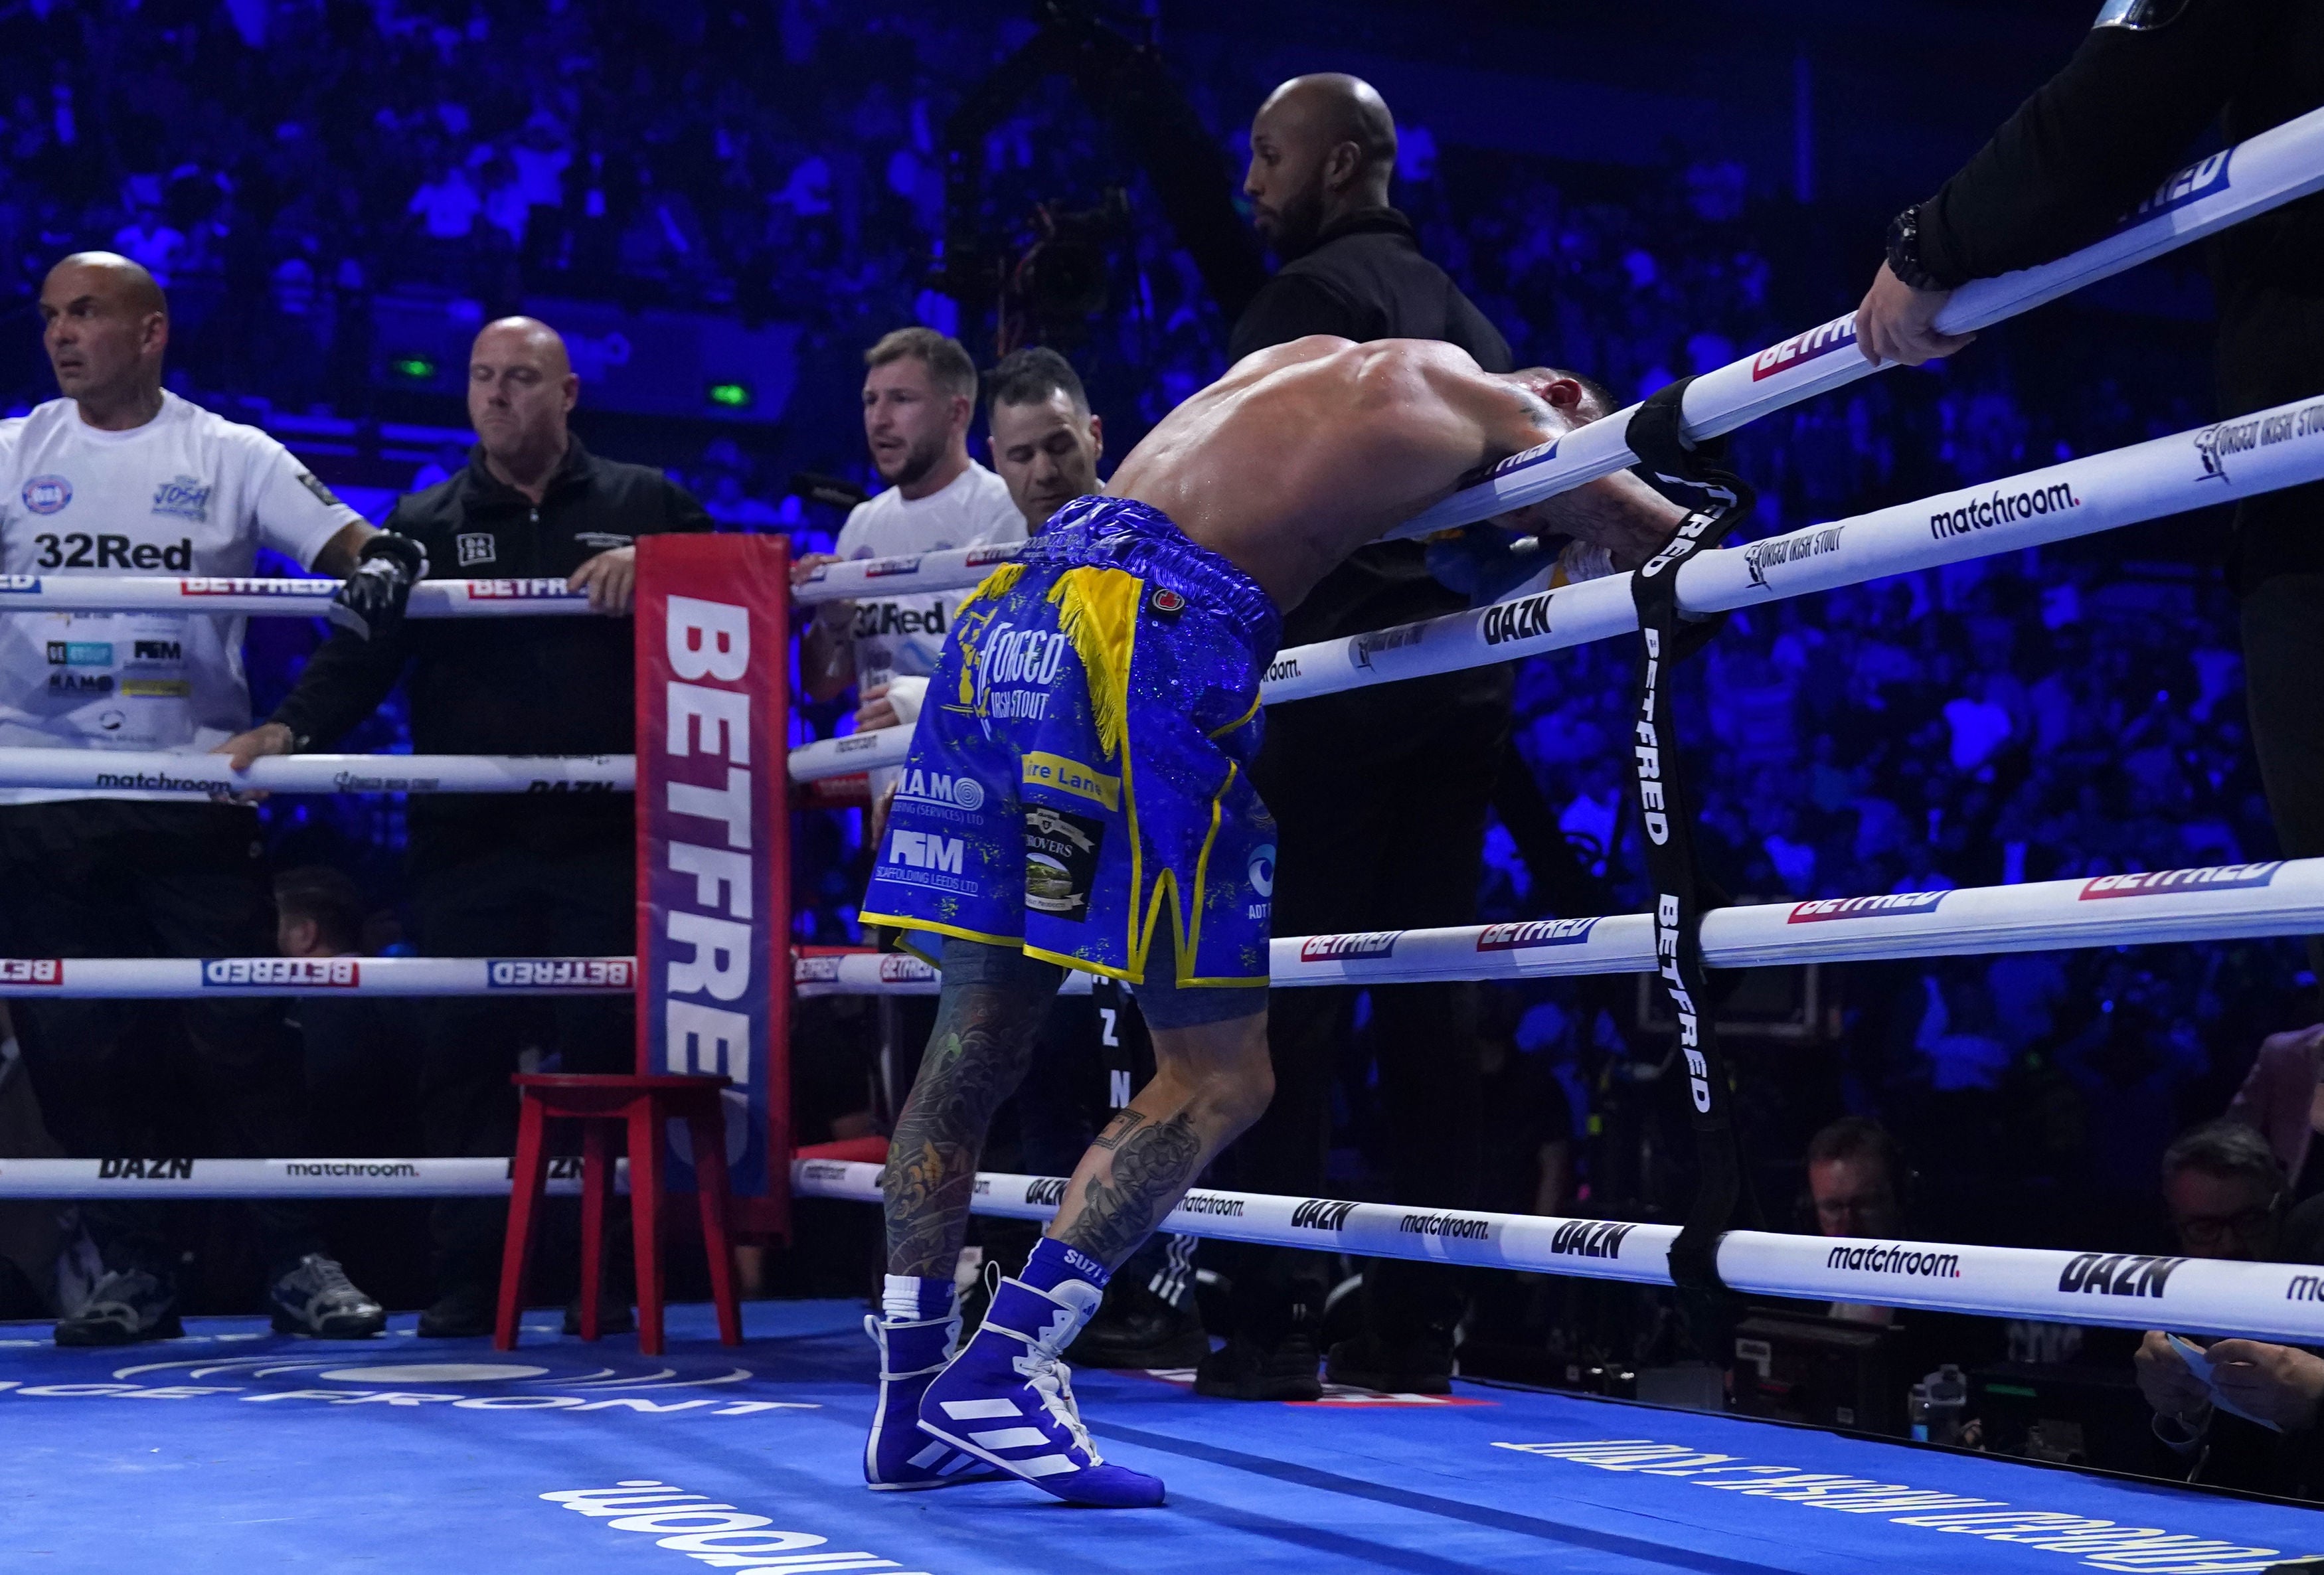 Josh Warrington reacts after being stopped by Leigh Wood against the run of the action